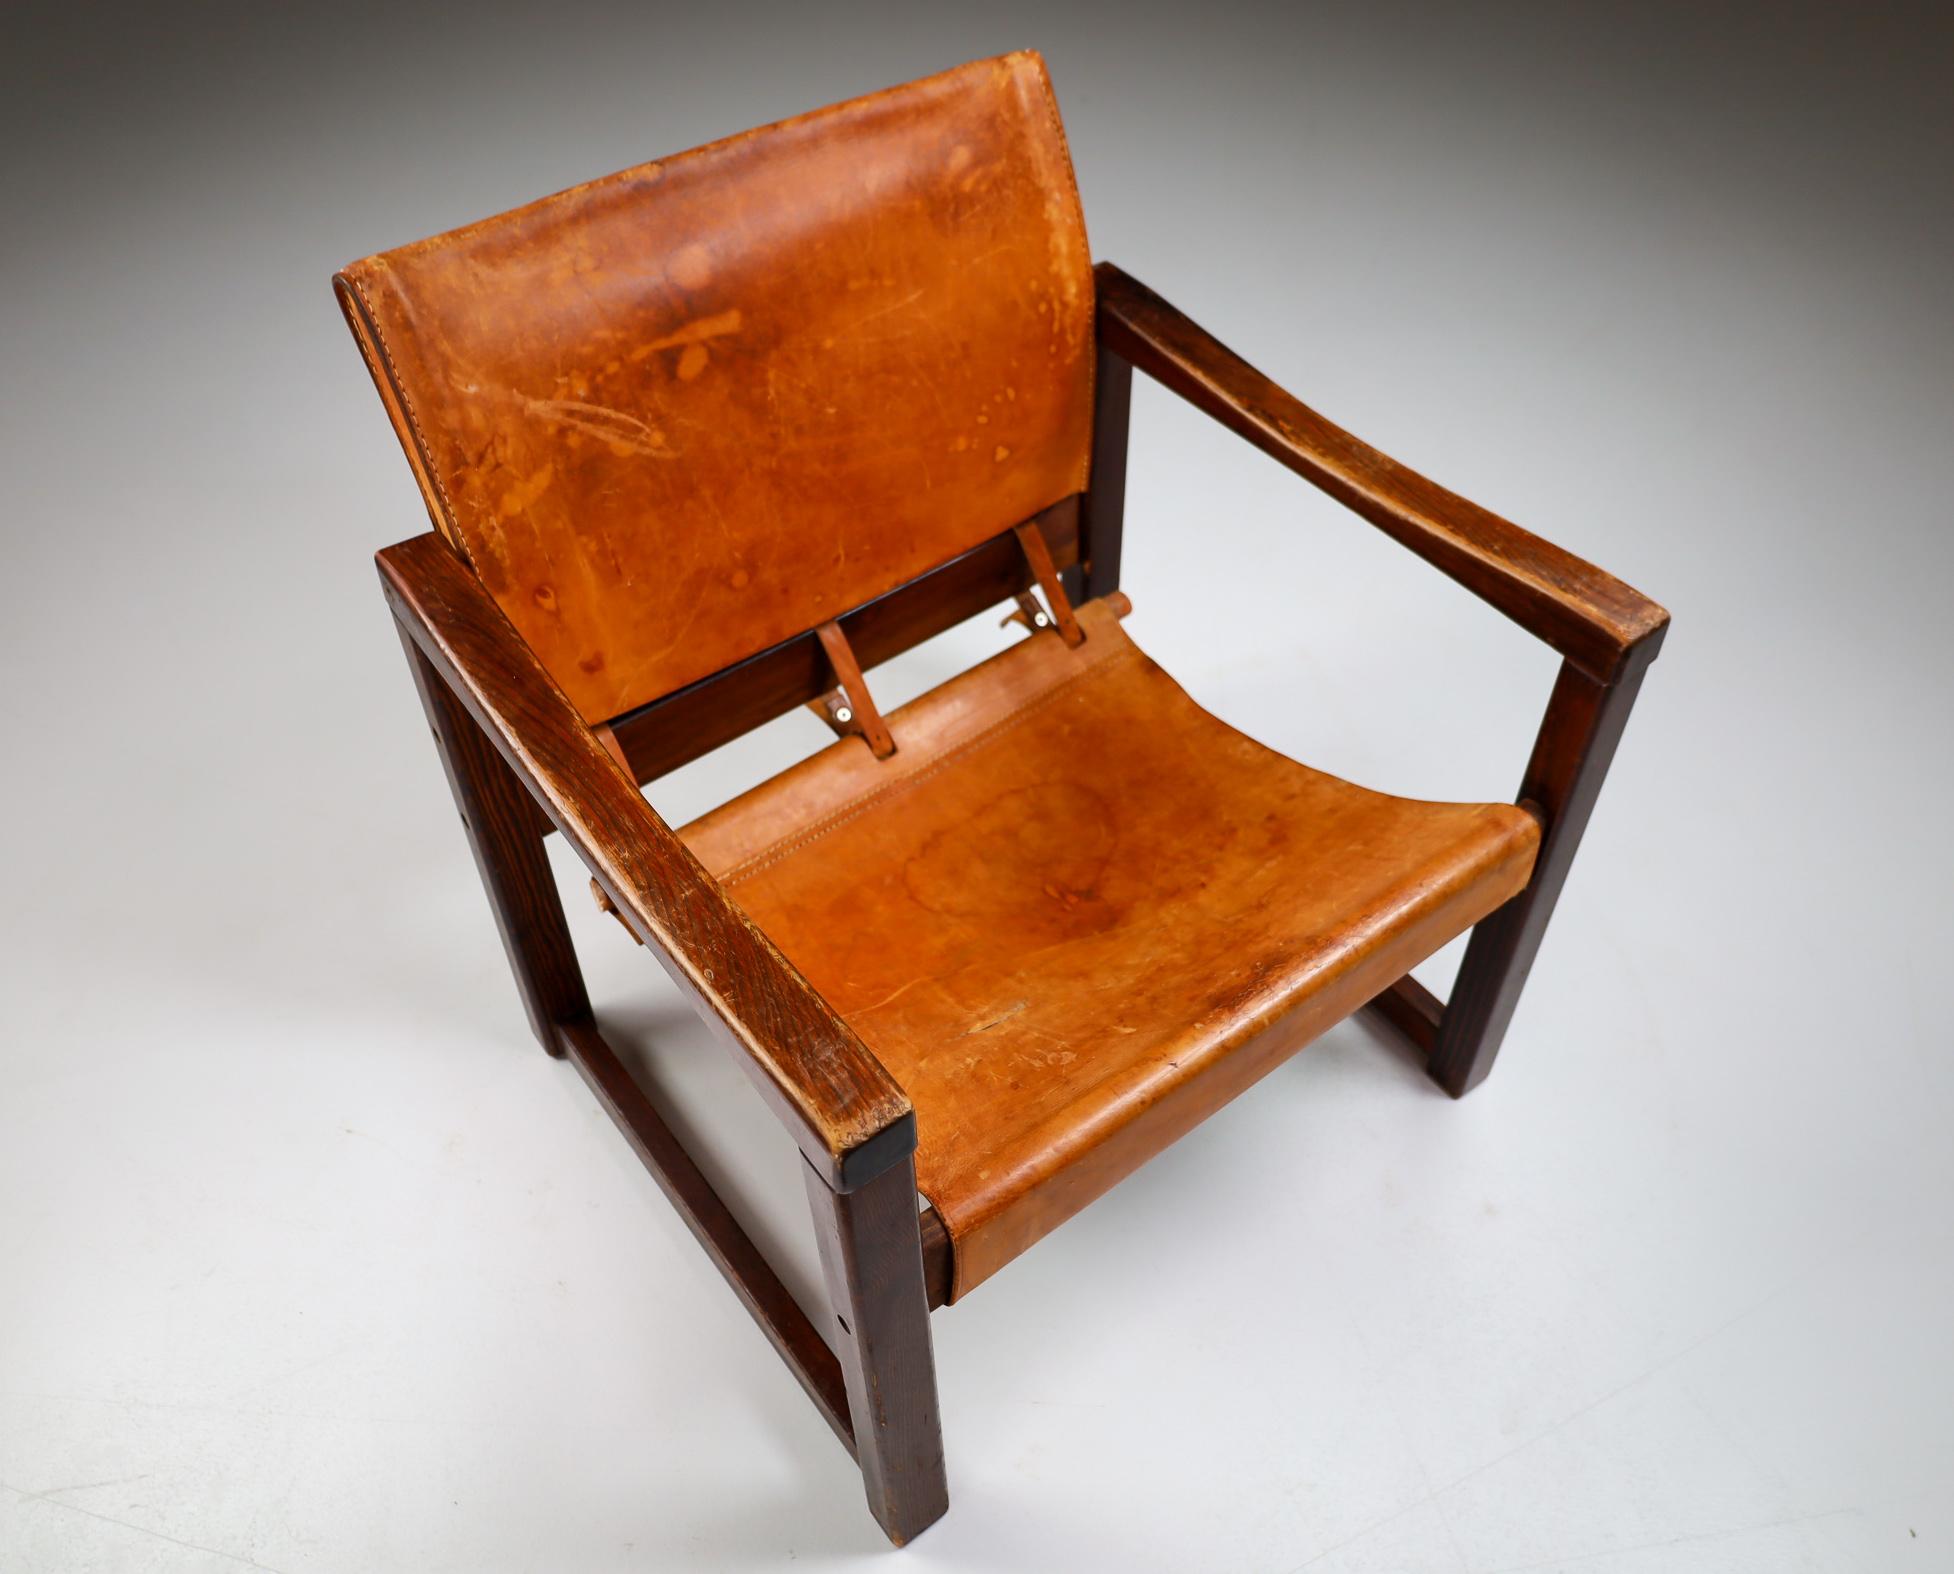 European Midcentury Safari Lounge Chair in Patinated Cognac Saddle Leather, 1970s